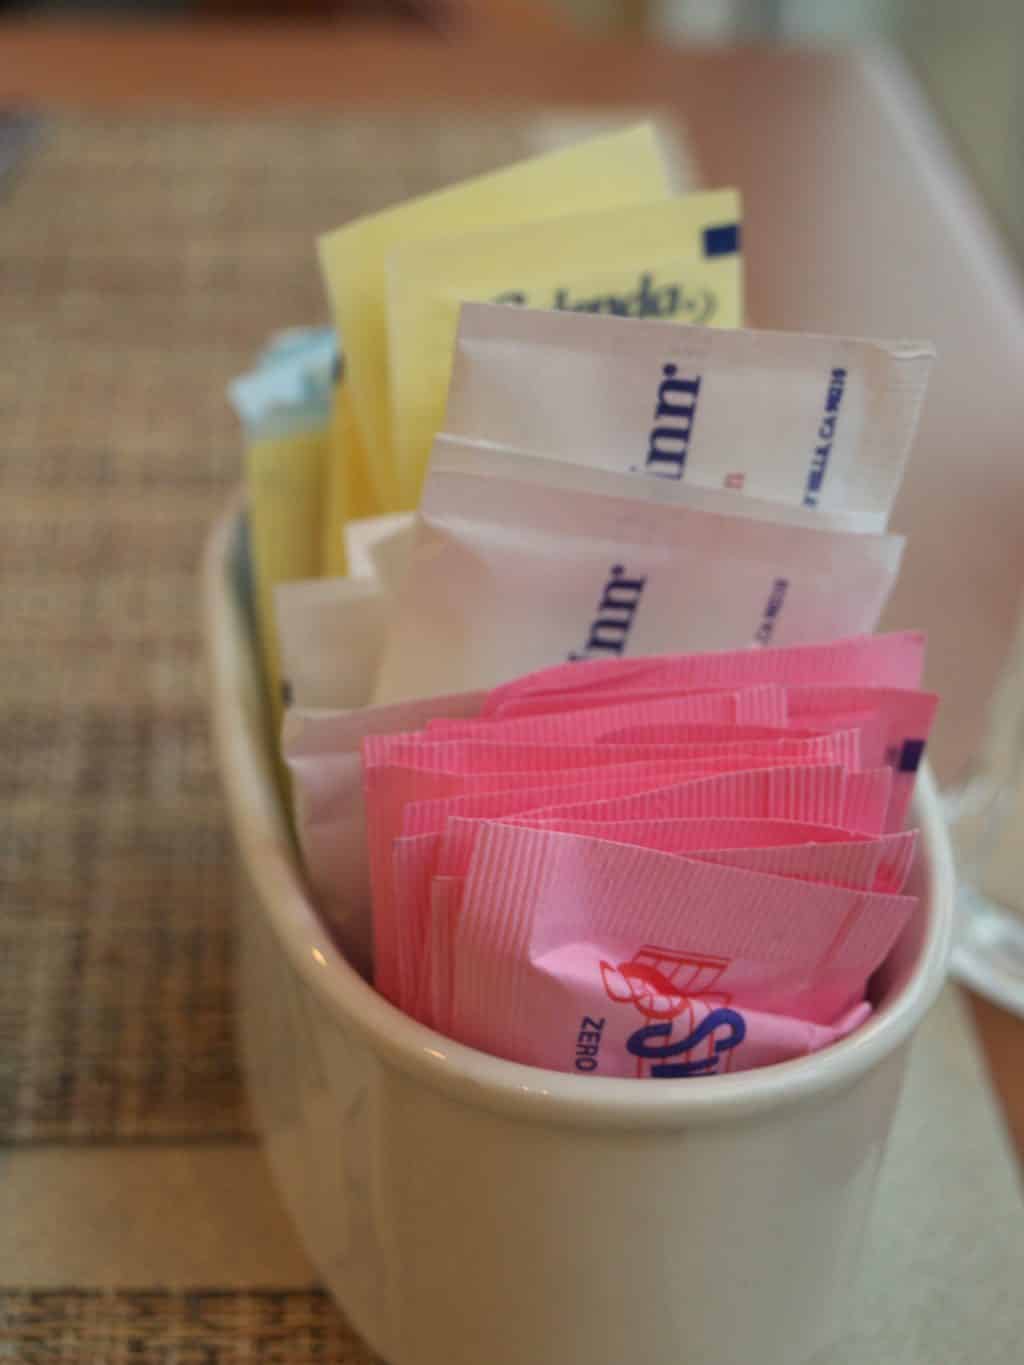 Where are the Blue Packets? Your dining tables and condiment stations may be missing an important sweetener.